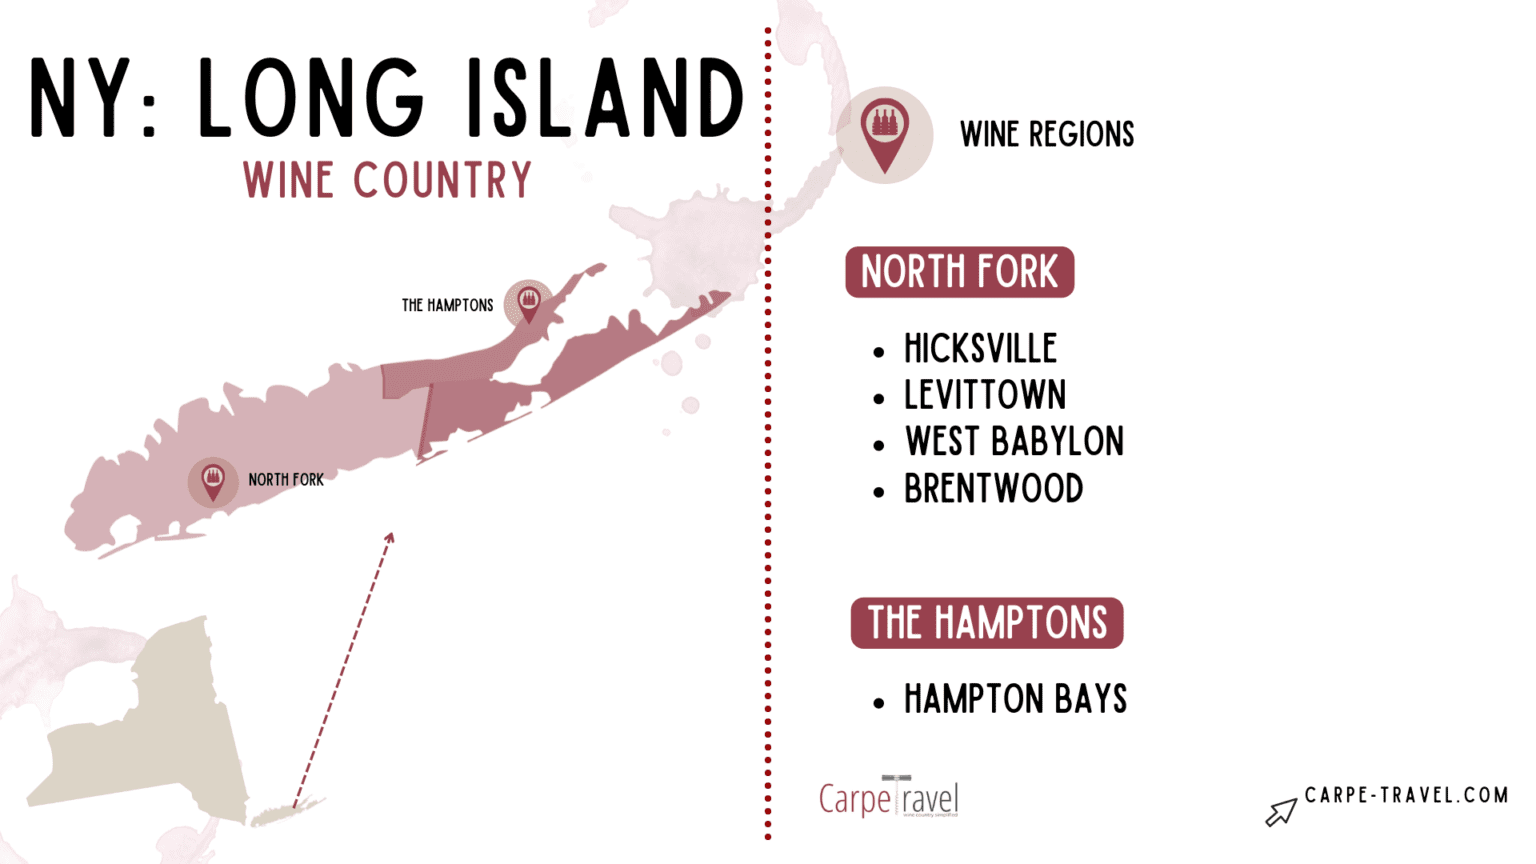 long island wine tour packages with hotel